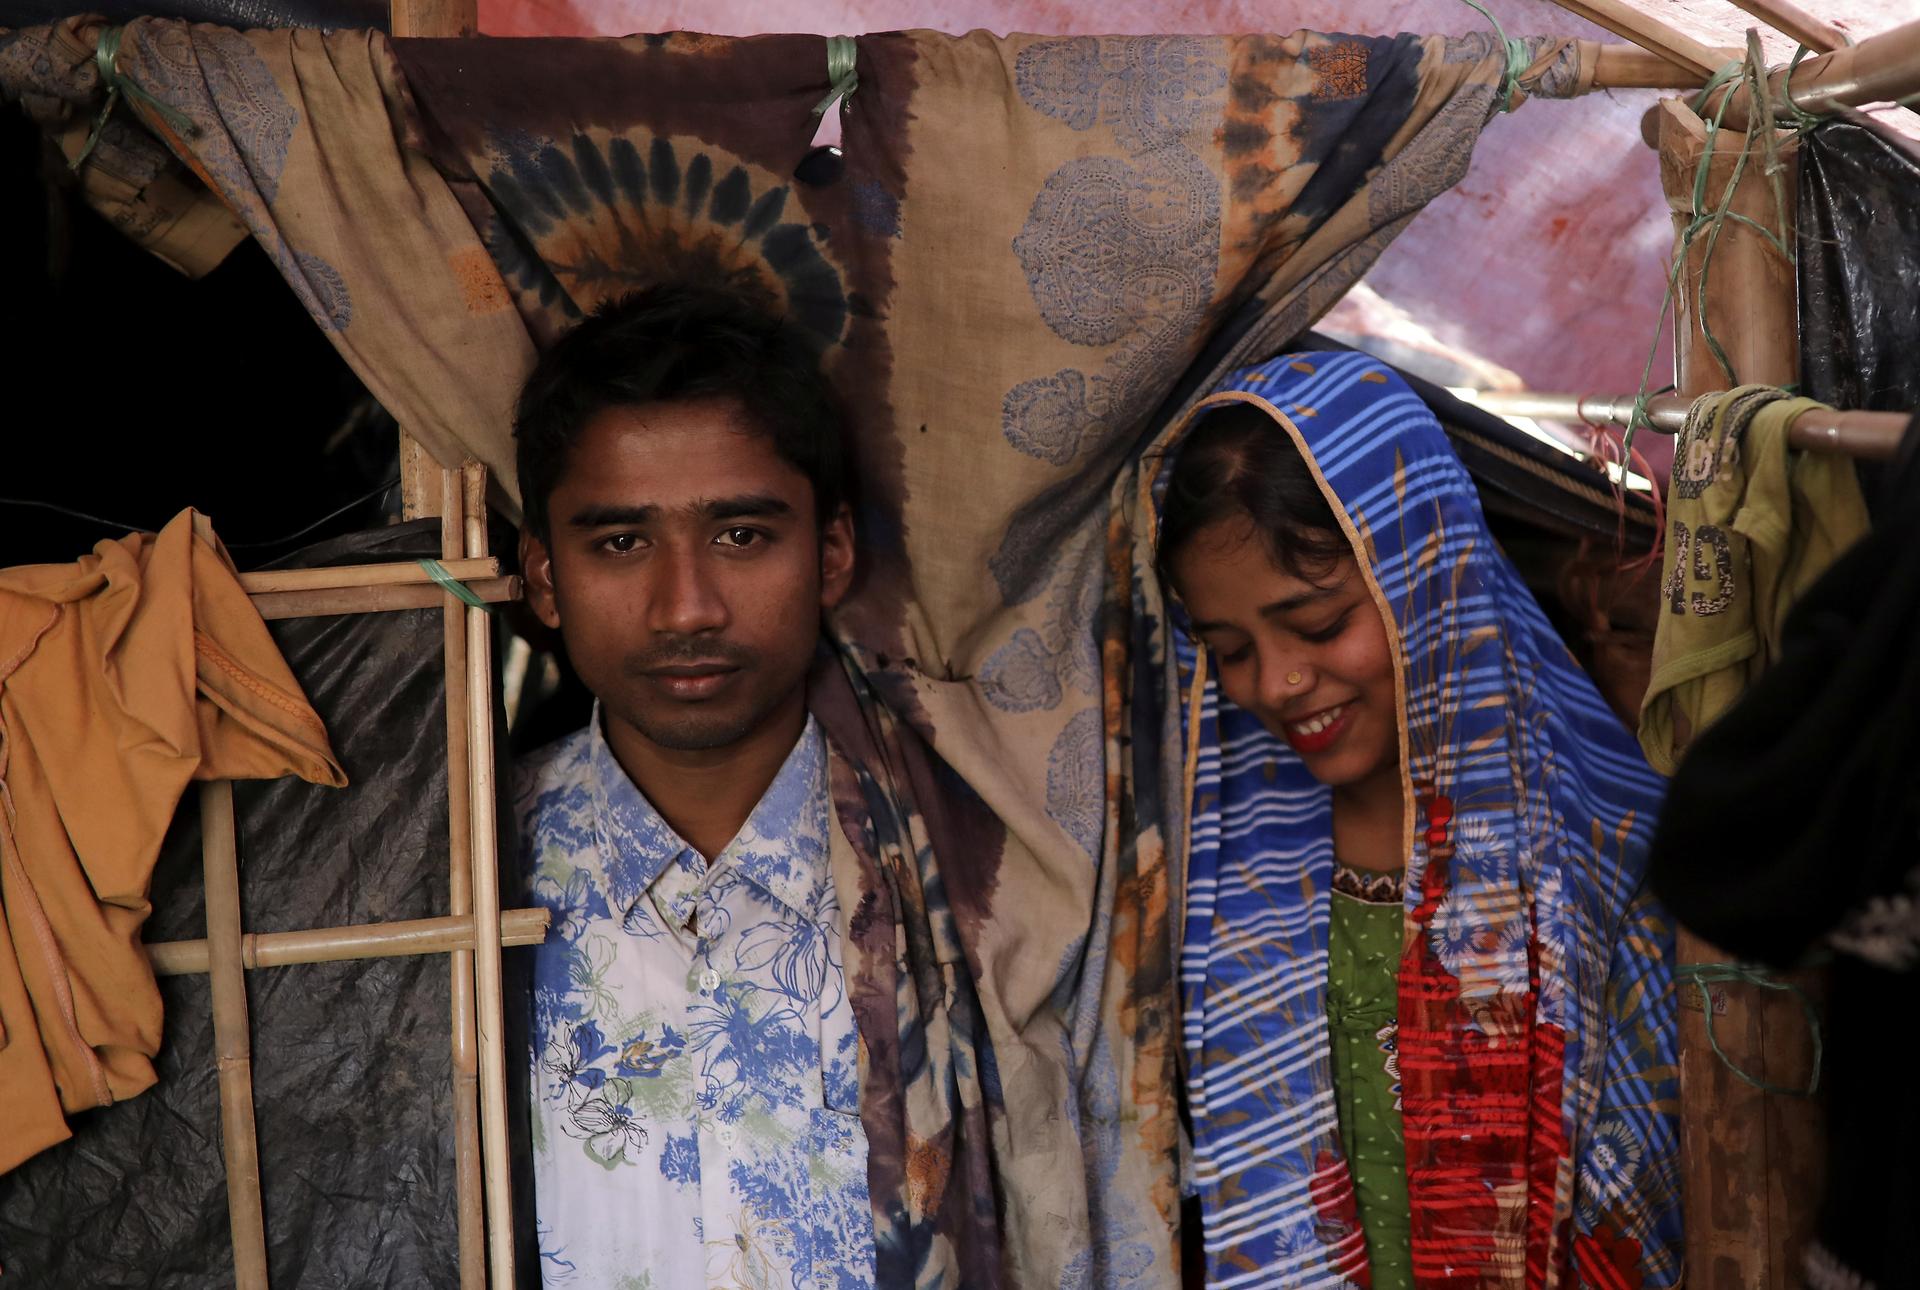 Rohingya refugees Saddam Hussein, 23, and his wife Shofika Begum, 18, pose in their temporary shelter at the Kutupalong refugee camp near Cox's Bazar, Bangladesh